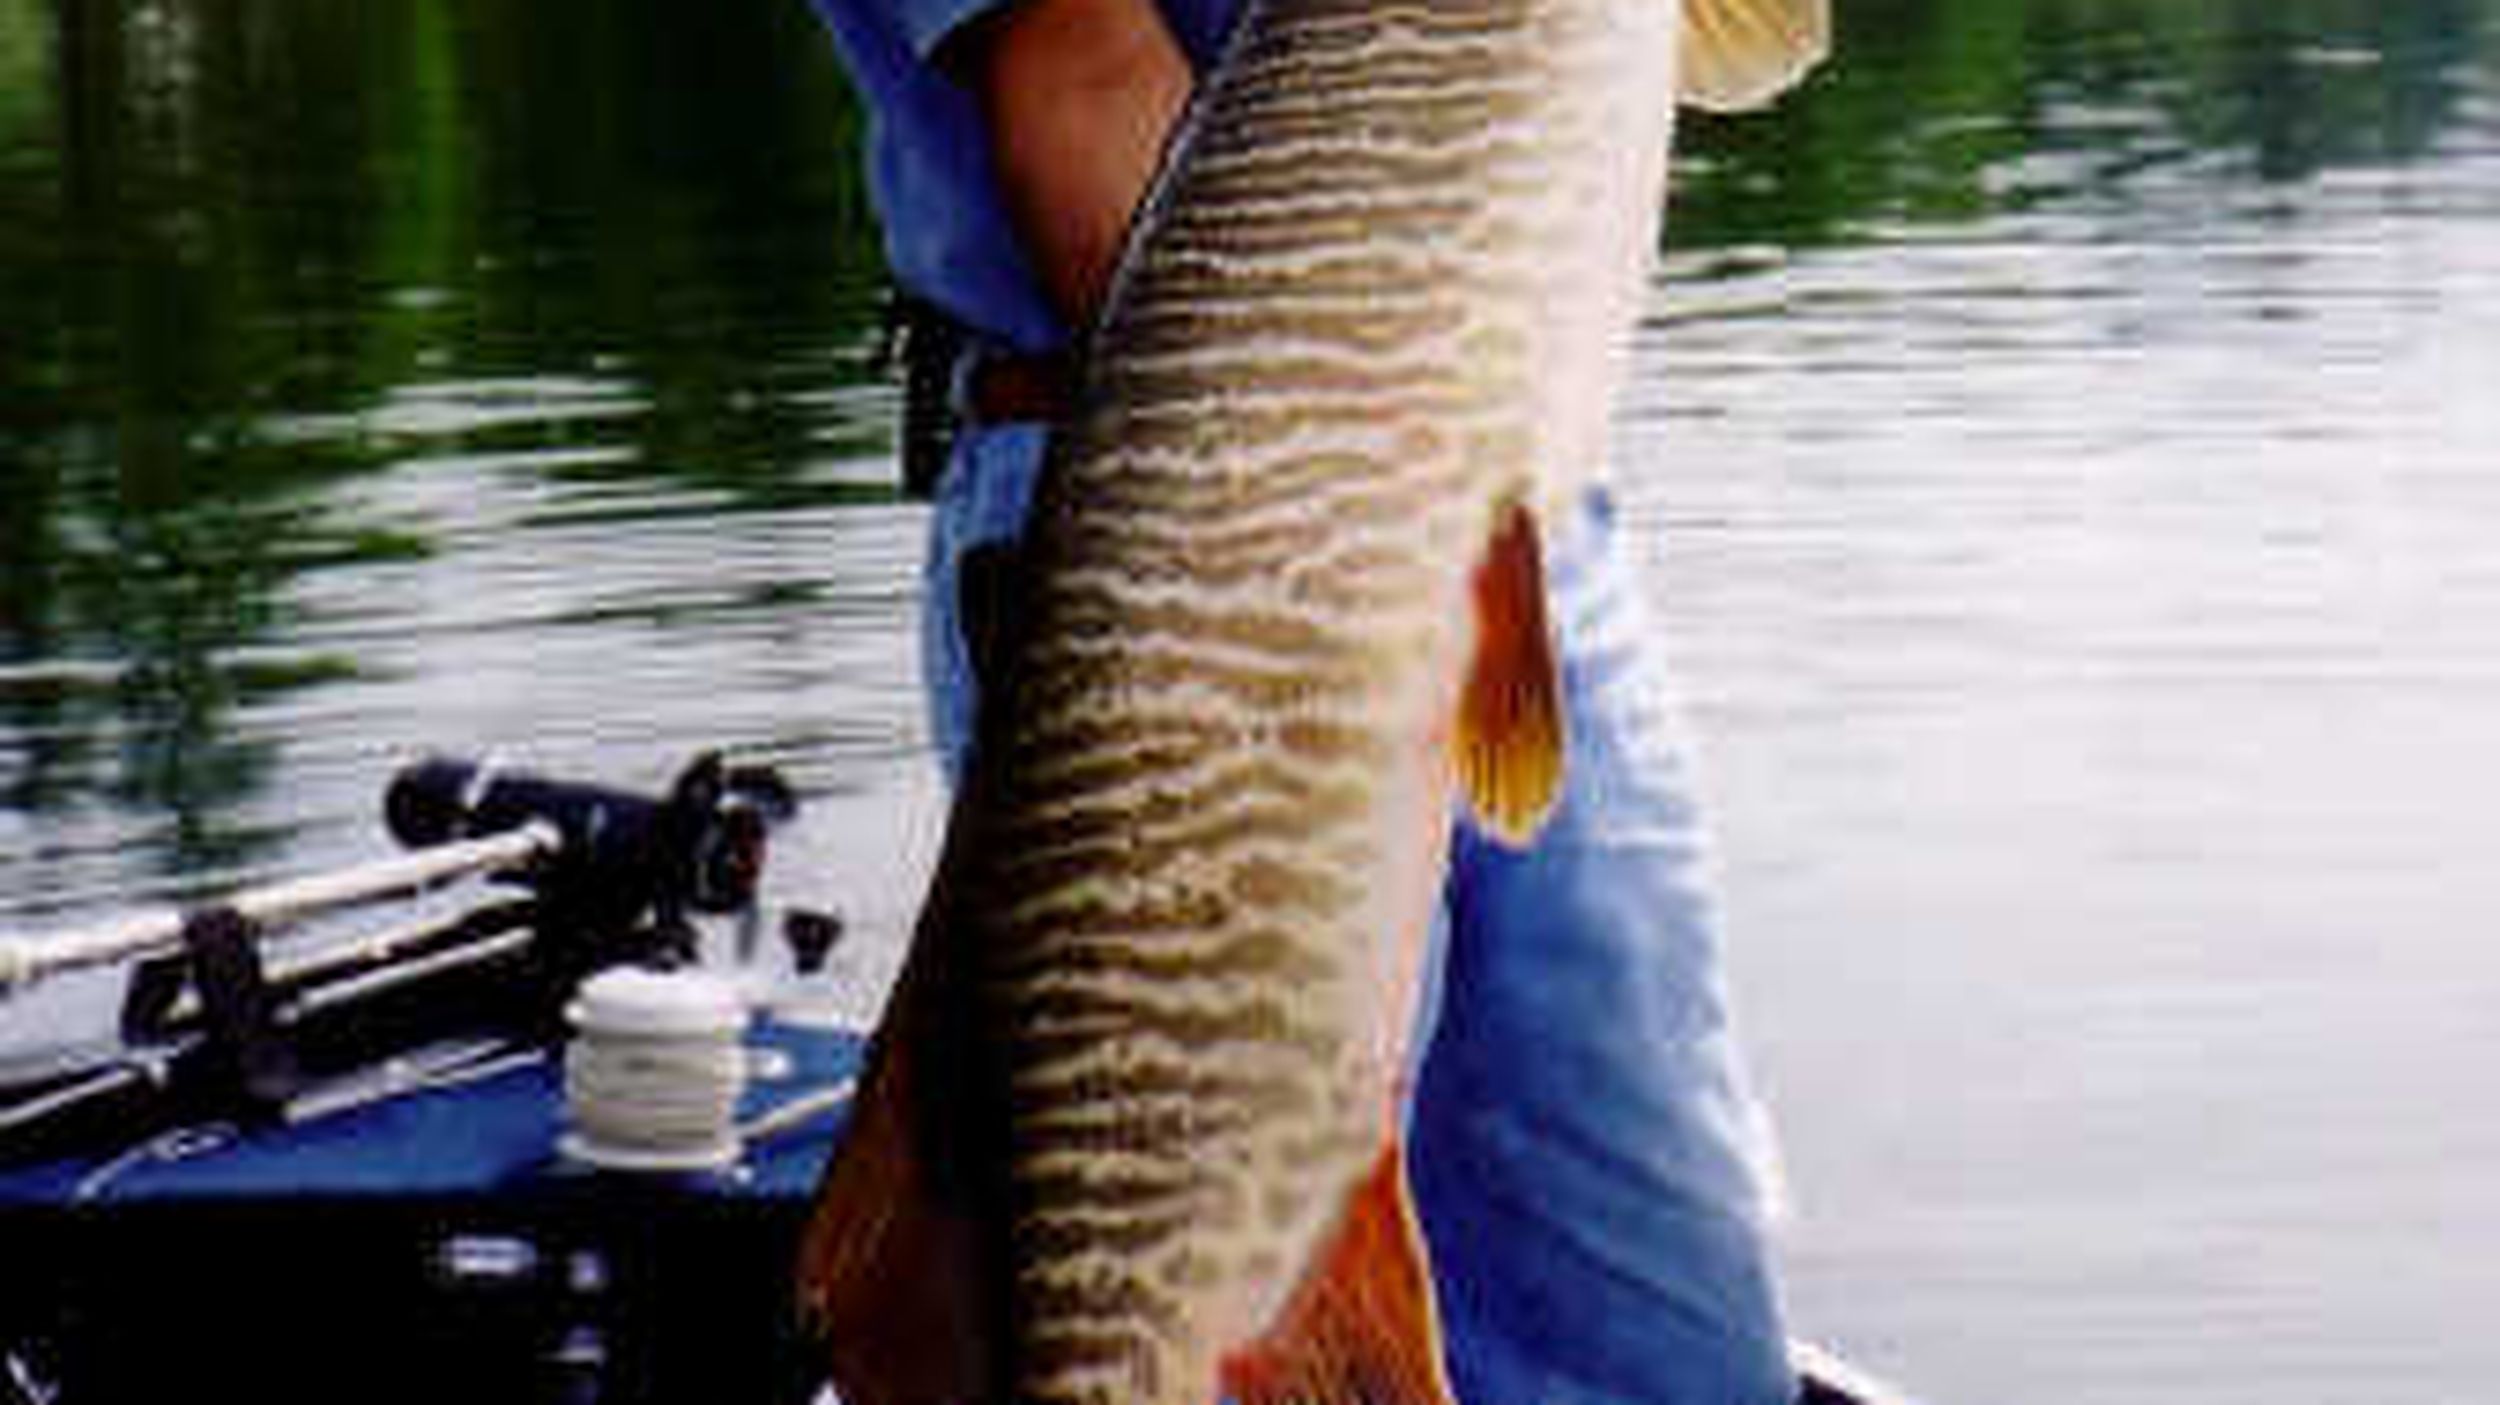 Tiger muskies are living large